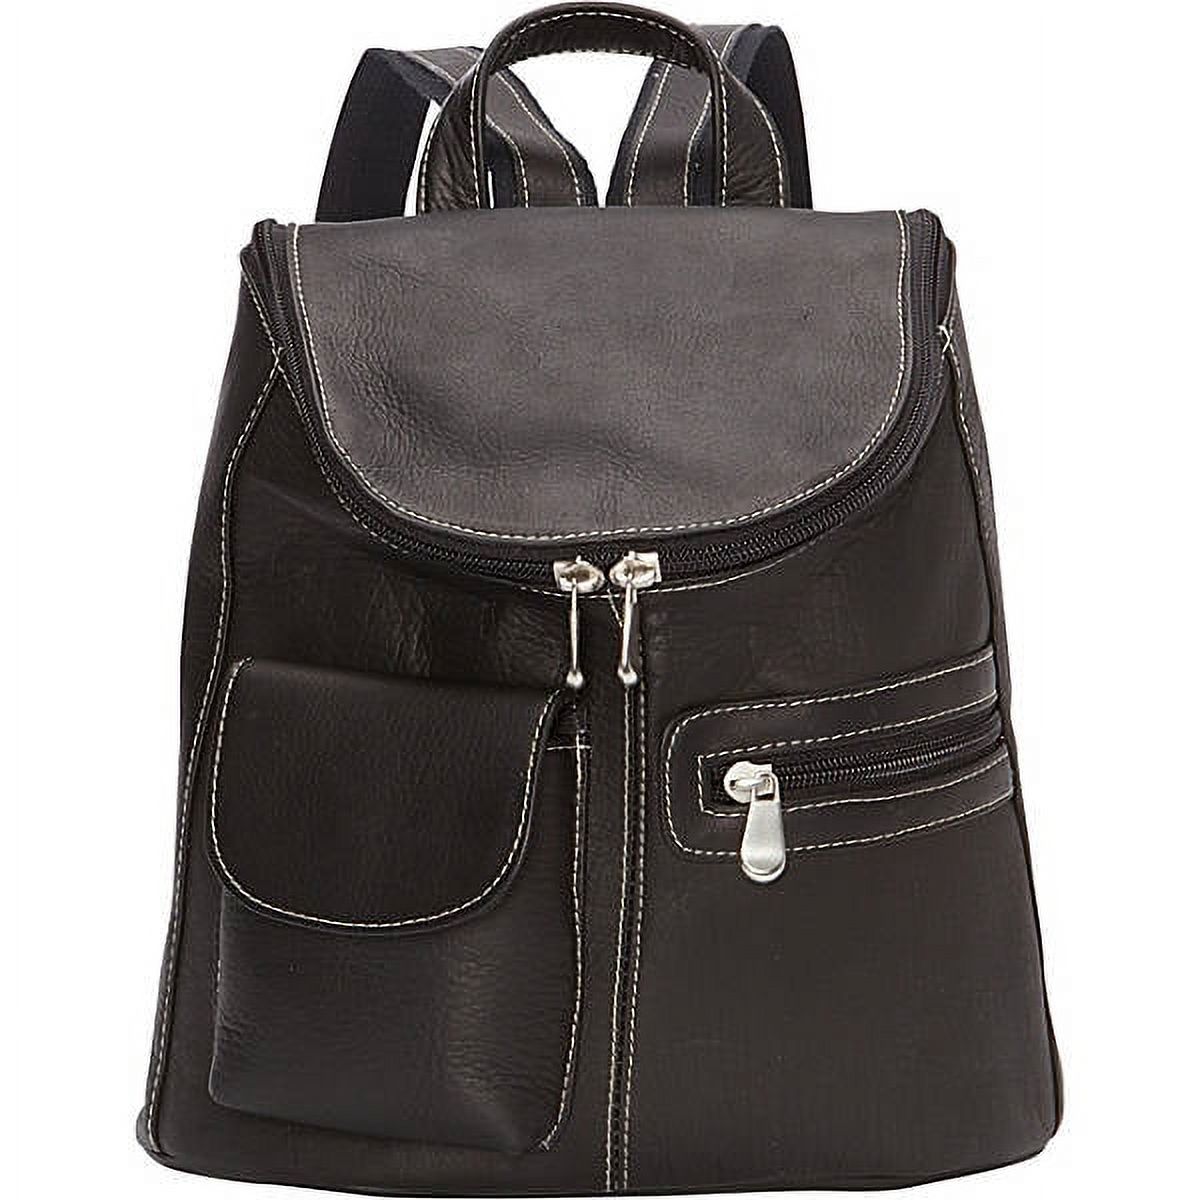 Le Donne Leather Lafayette Classic Backpack LD-9108 - image 2 of 5